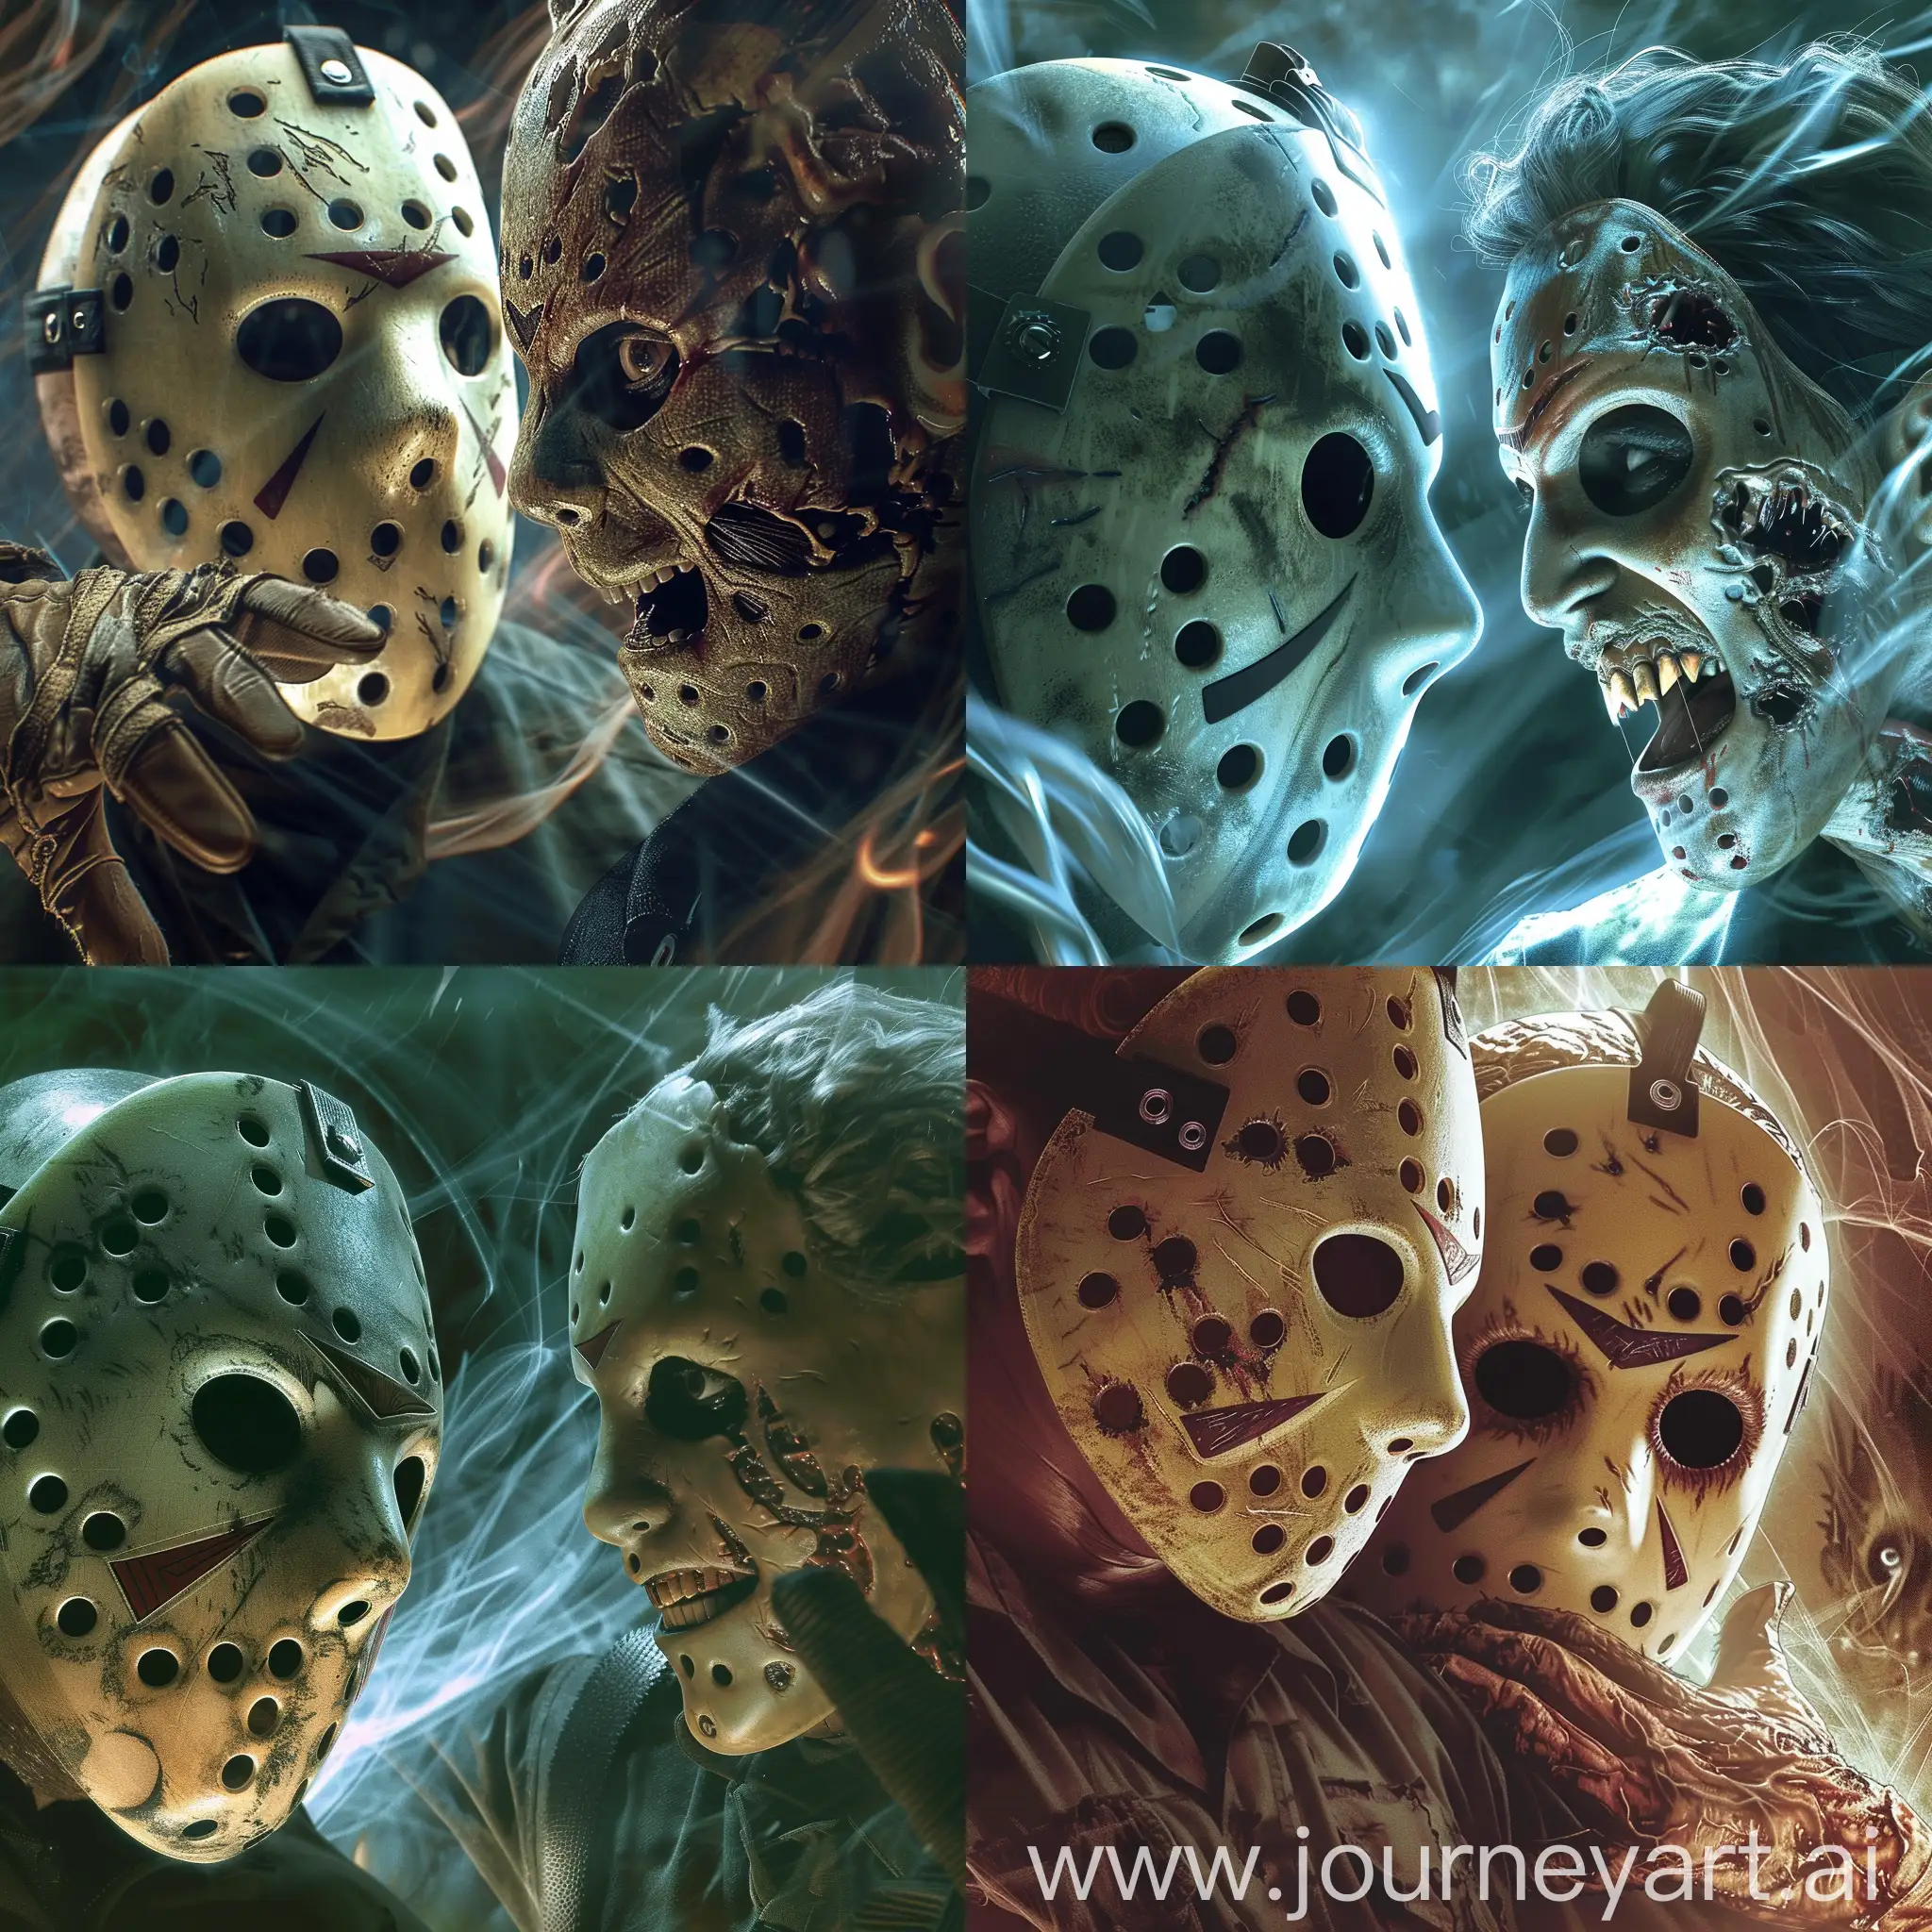 In a close-up shot fraught with tension, Jason Voorhees and Freddy Krueger lock eyes in a battle of wills. Jason's iconic hockey mask is cracked and weathered, revealing only a glimpse of his cold, unyielding stare beneath. His expression is one of silent determination, unmoved by fear or emotion. In contrast, Freddy's burned visage is twisted into a malevolent grin, his razor-sharp glove gleaming ominously in the dim light. Behind them, wisps of spectral energy swirl, hinting at the otherworldly powers at their command. In this moment frozen in time, the stage is set for a terrifying clash between the unstoppable force and the master of nightmares.